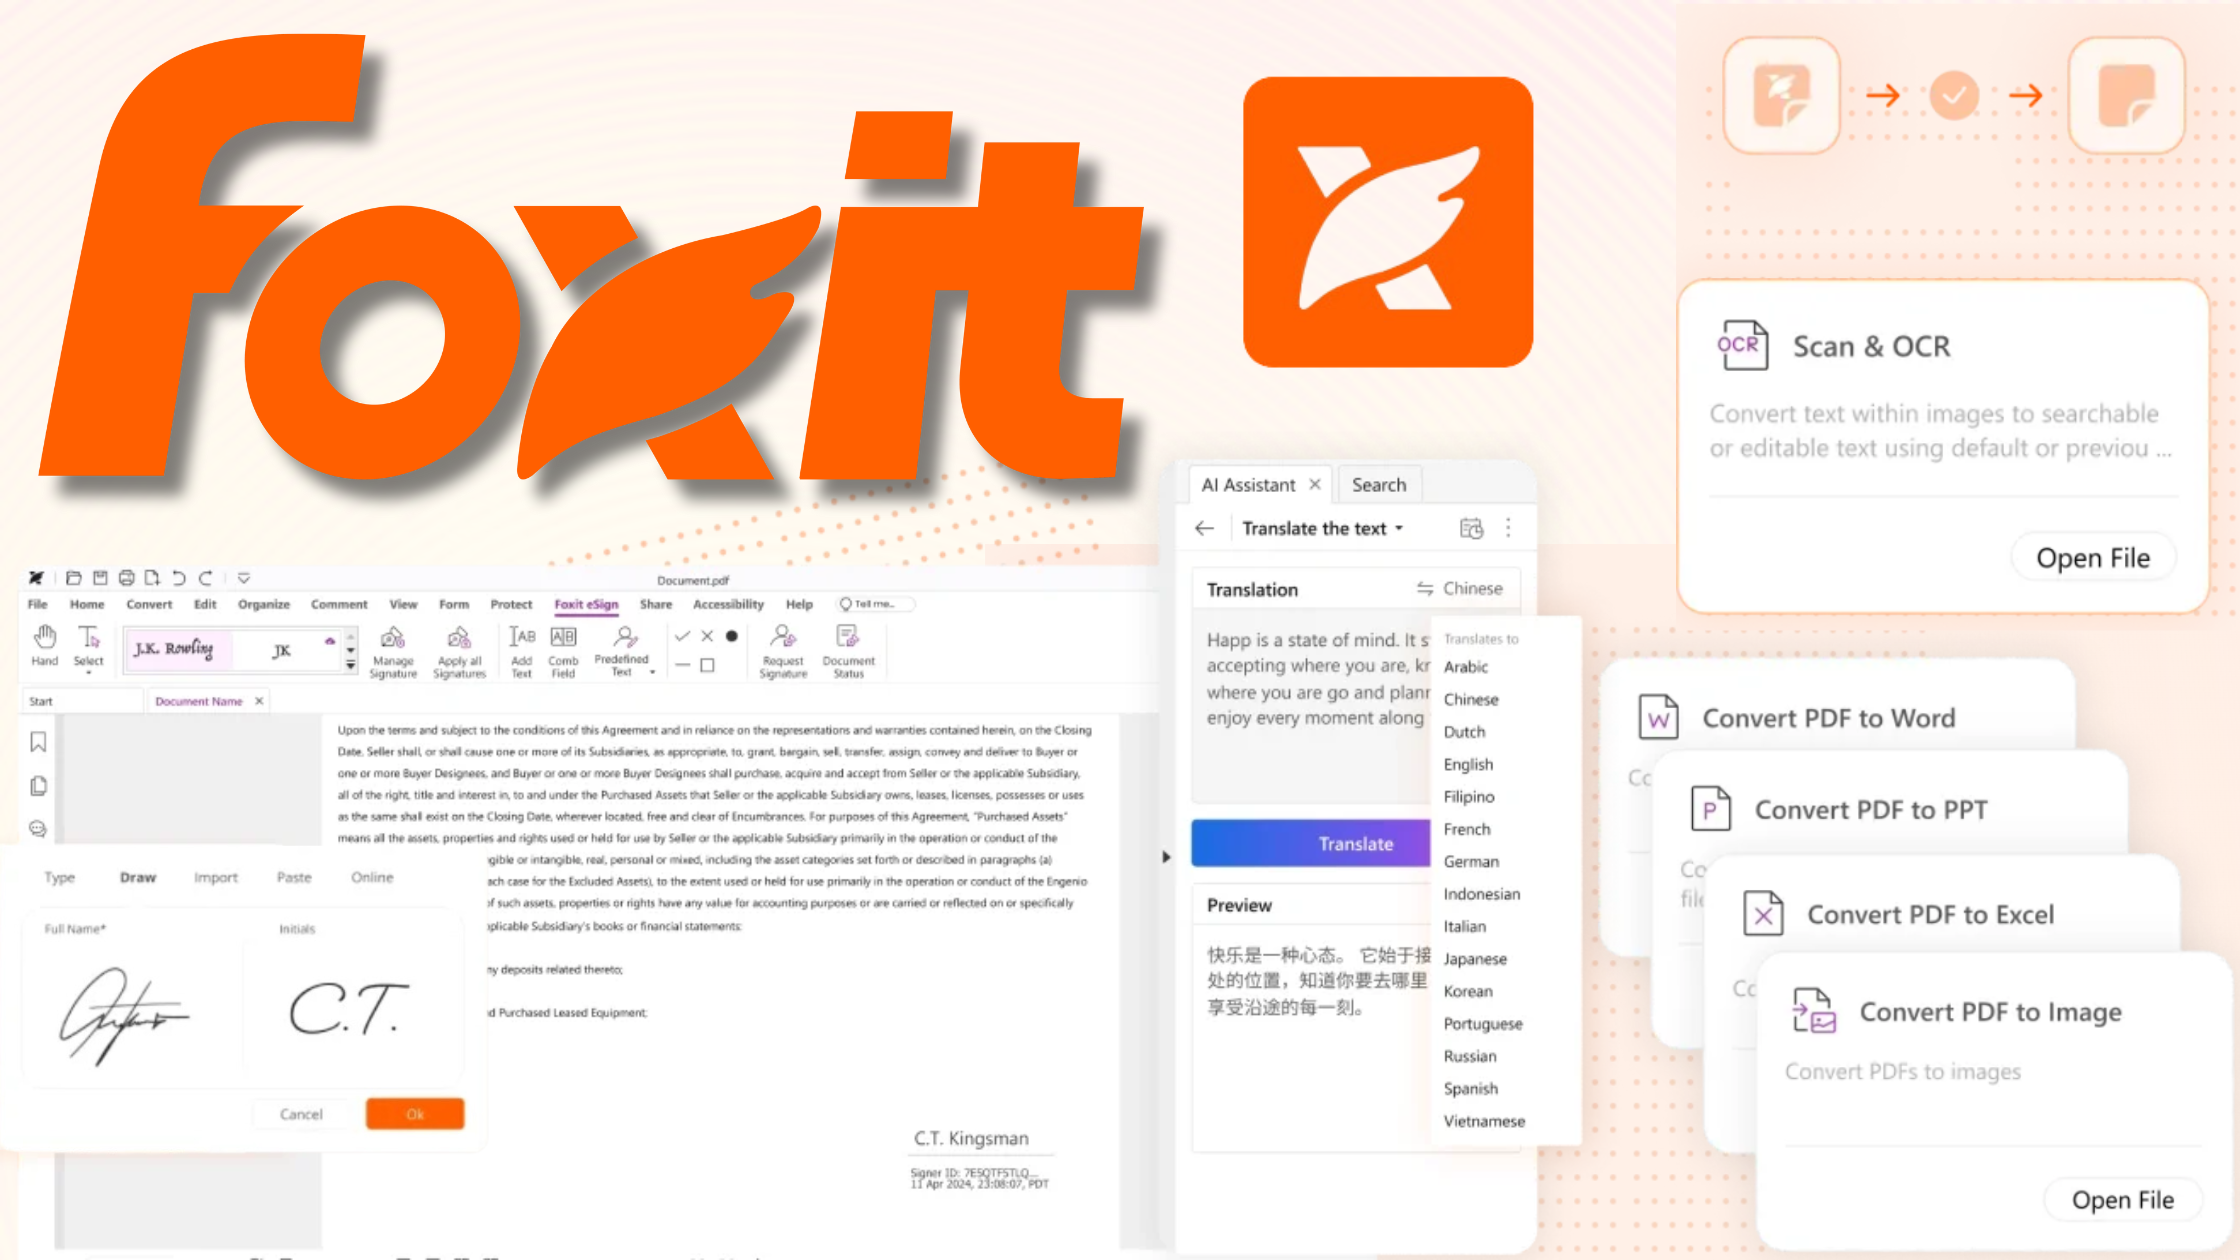 Unleash the Power of PDFs: Introducing the All-New Foxit PDF Experience